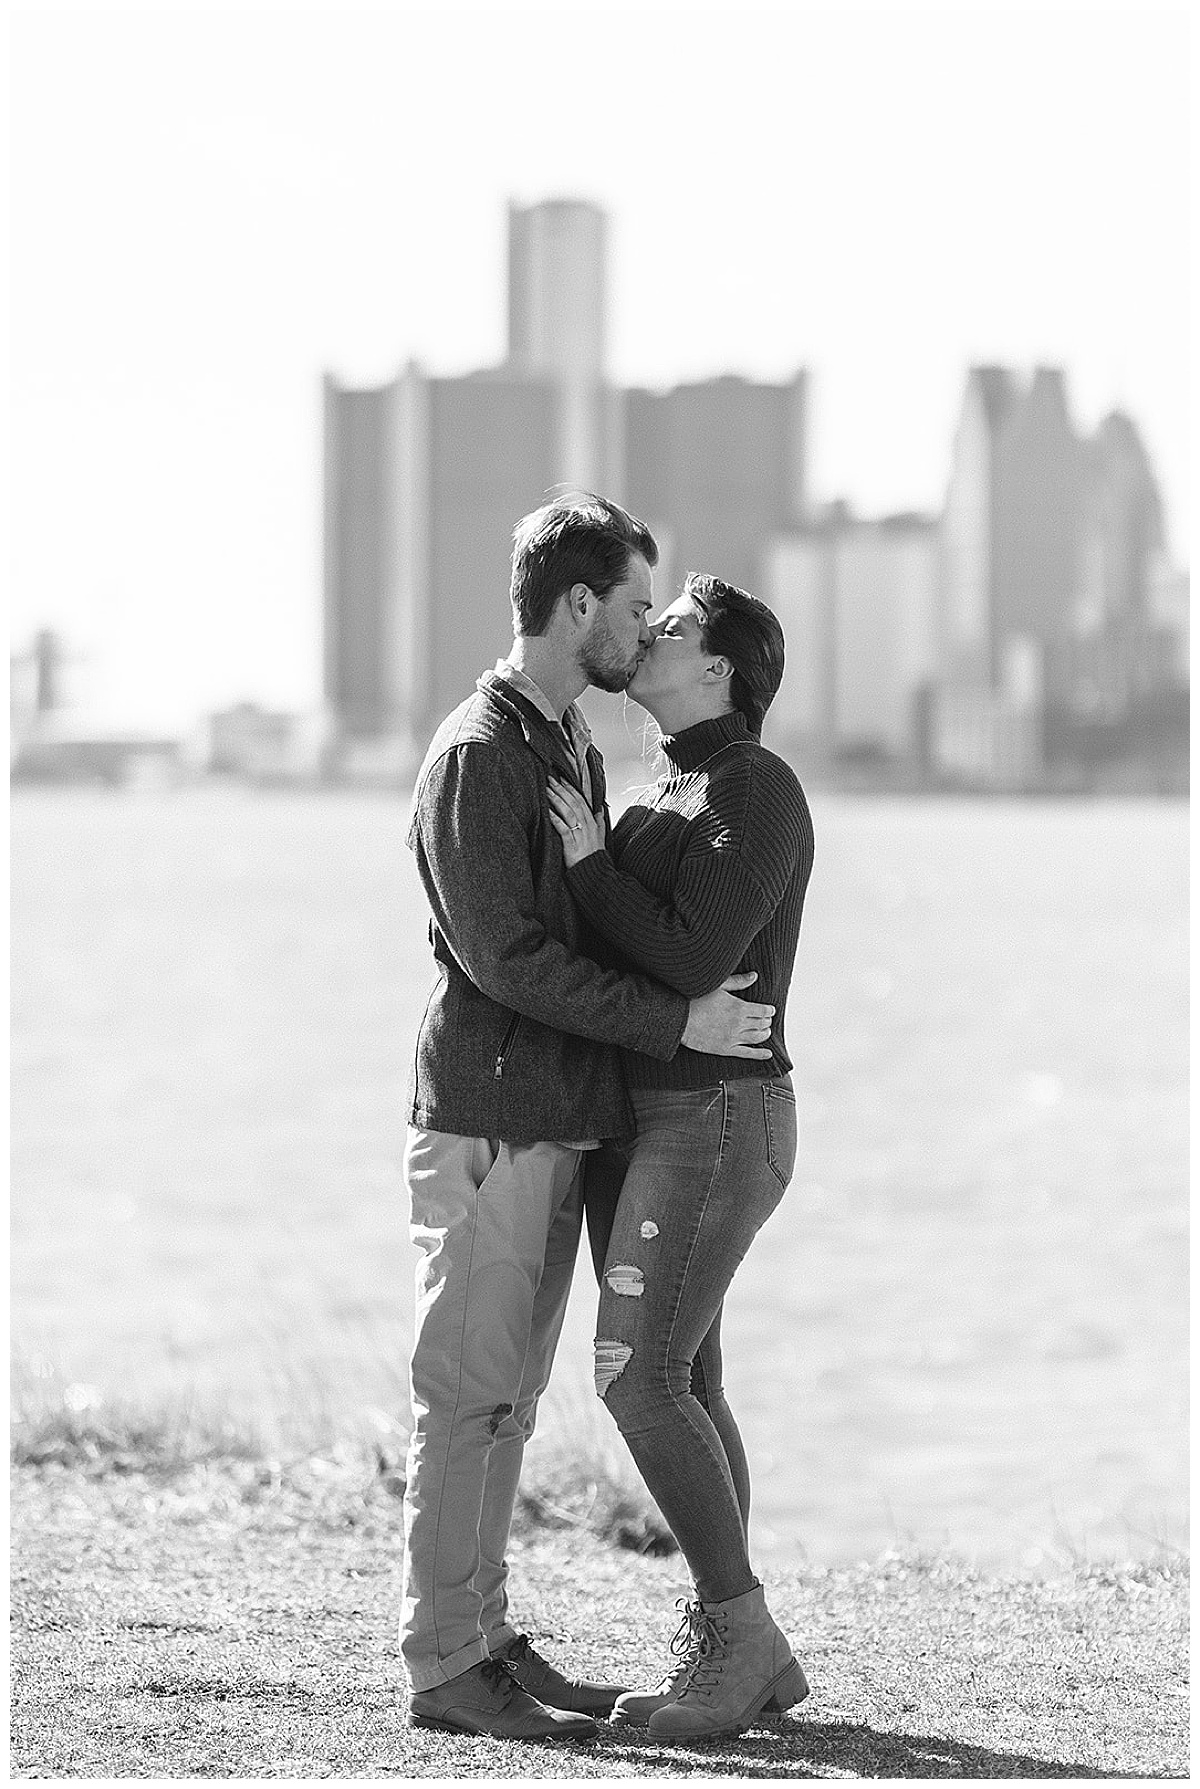 Man and woman share a kiss for Detroit Wedding Photographer